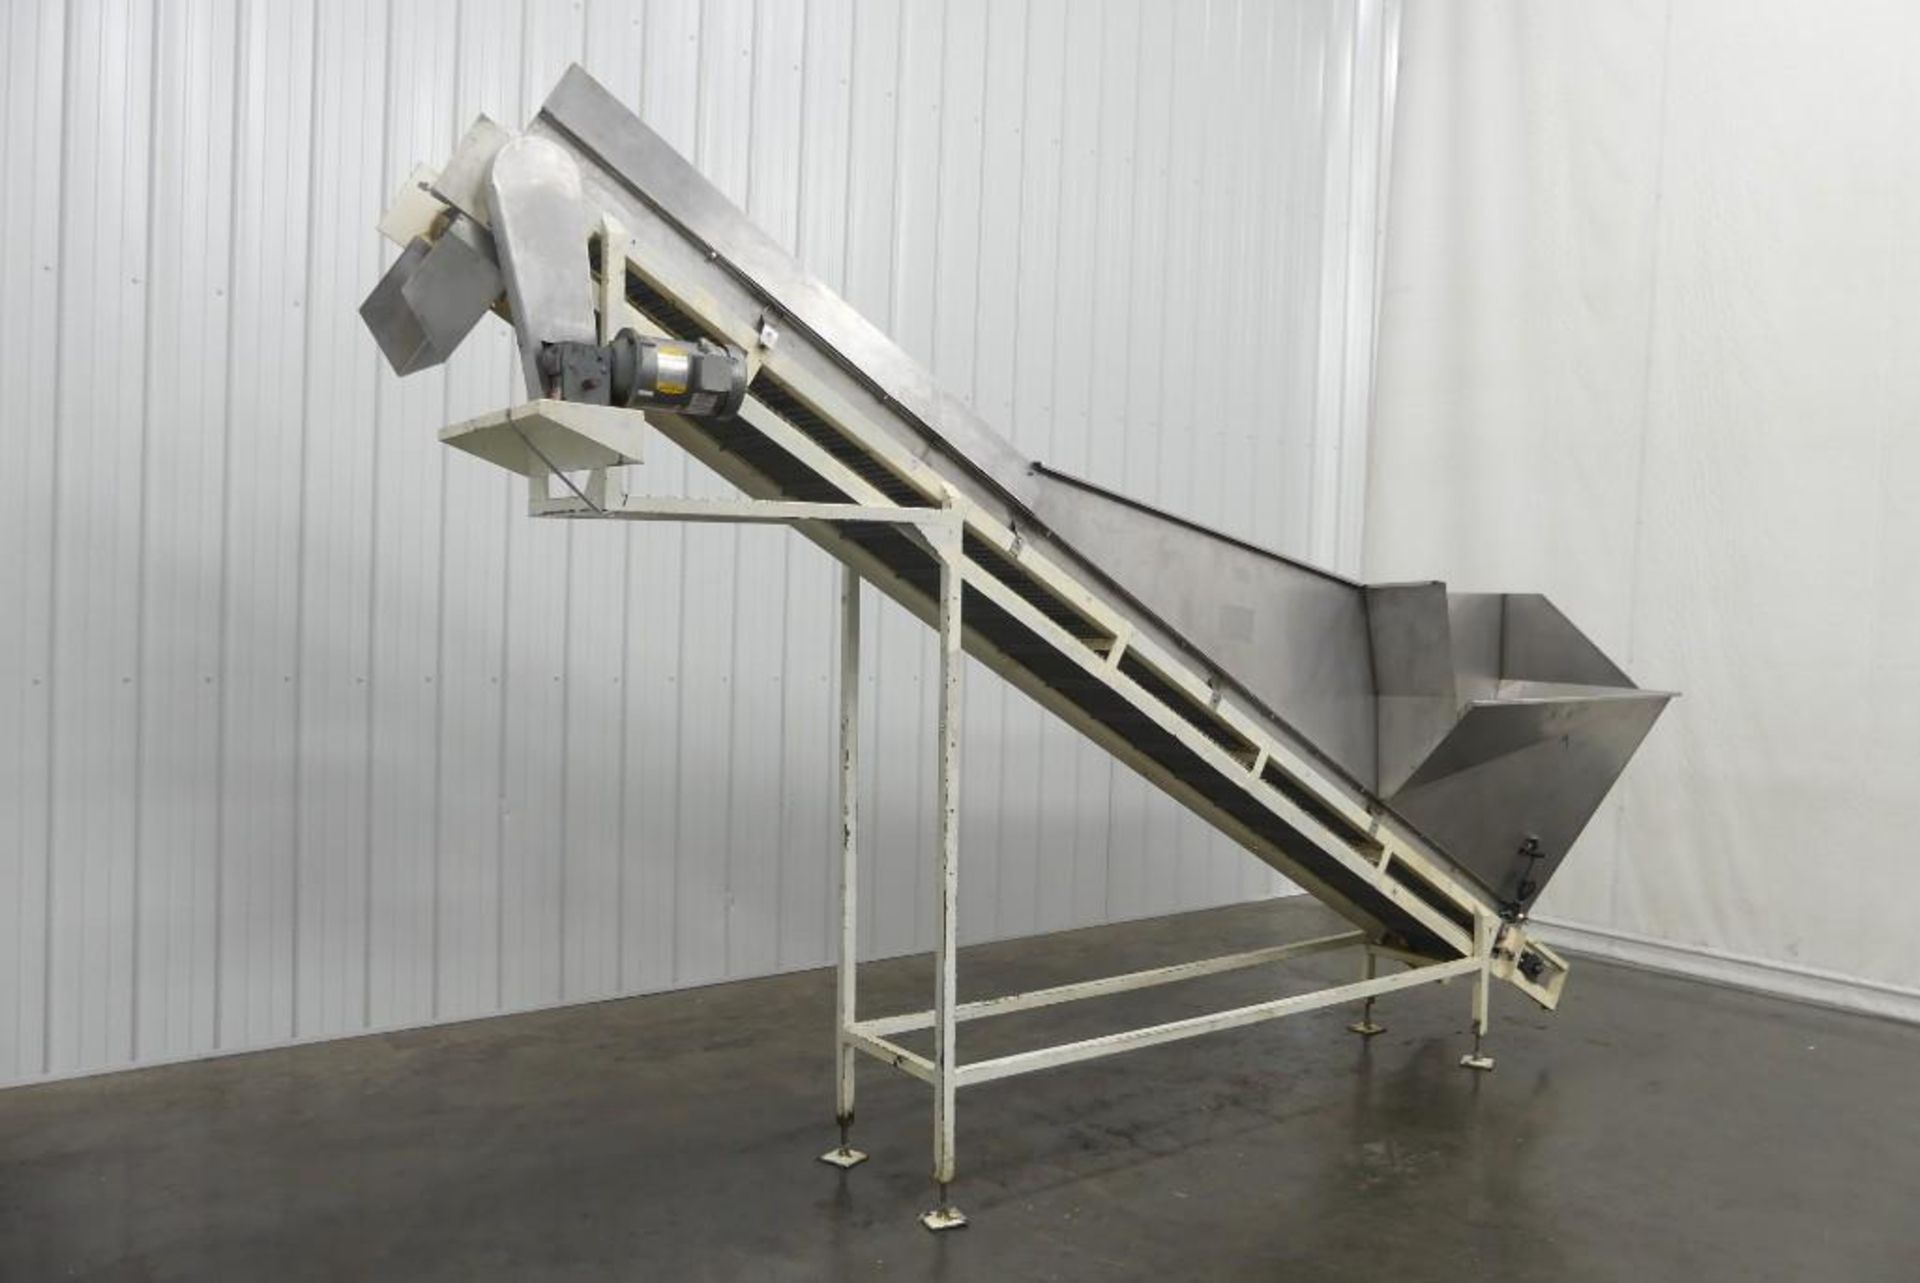 Cleated Incline Conveyor with Hopper 16" Wide - Image 2 of 7